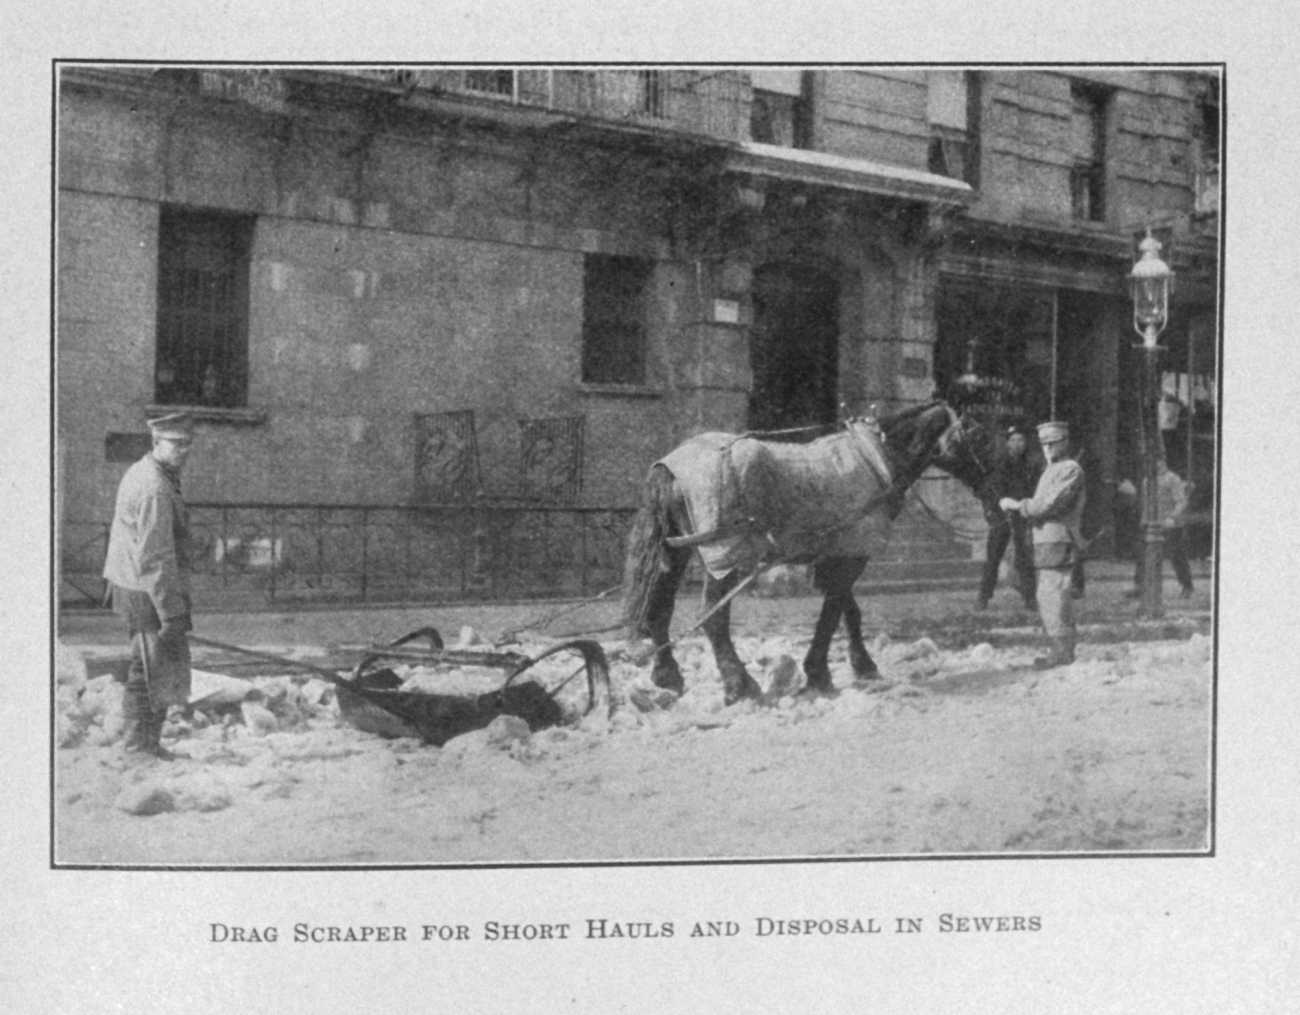 Snow removal in New York City in 'The Municipal Engineers Journal', Vol